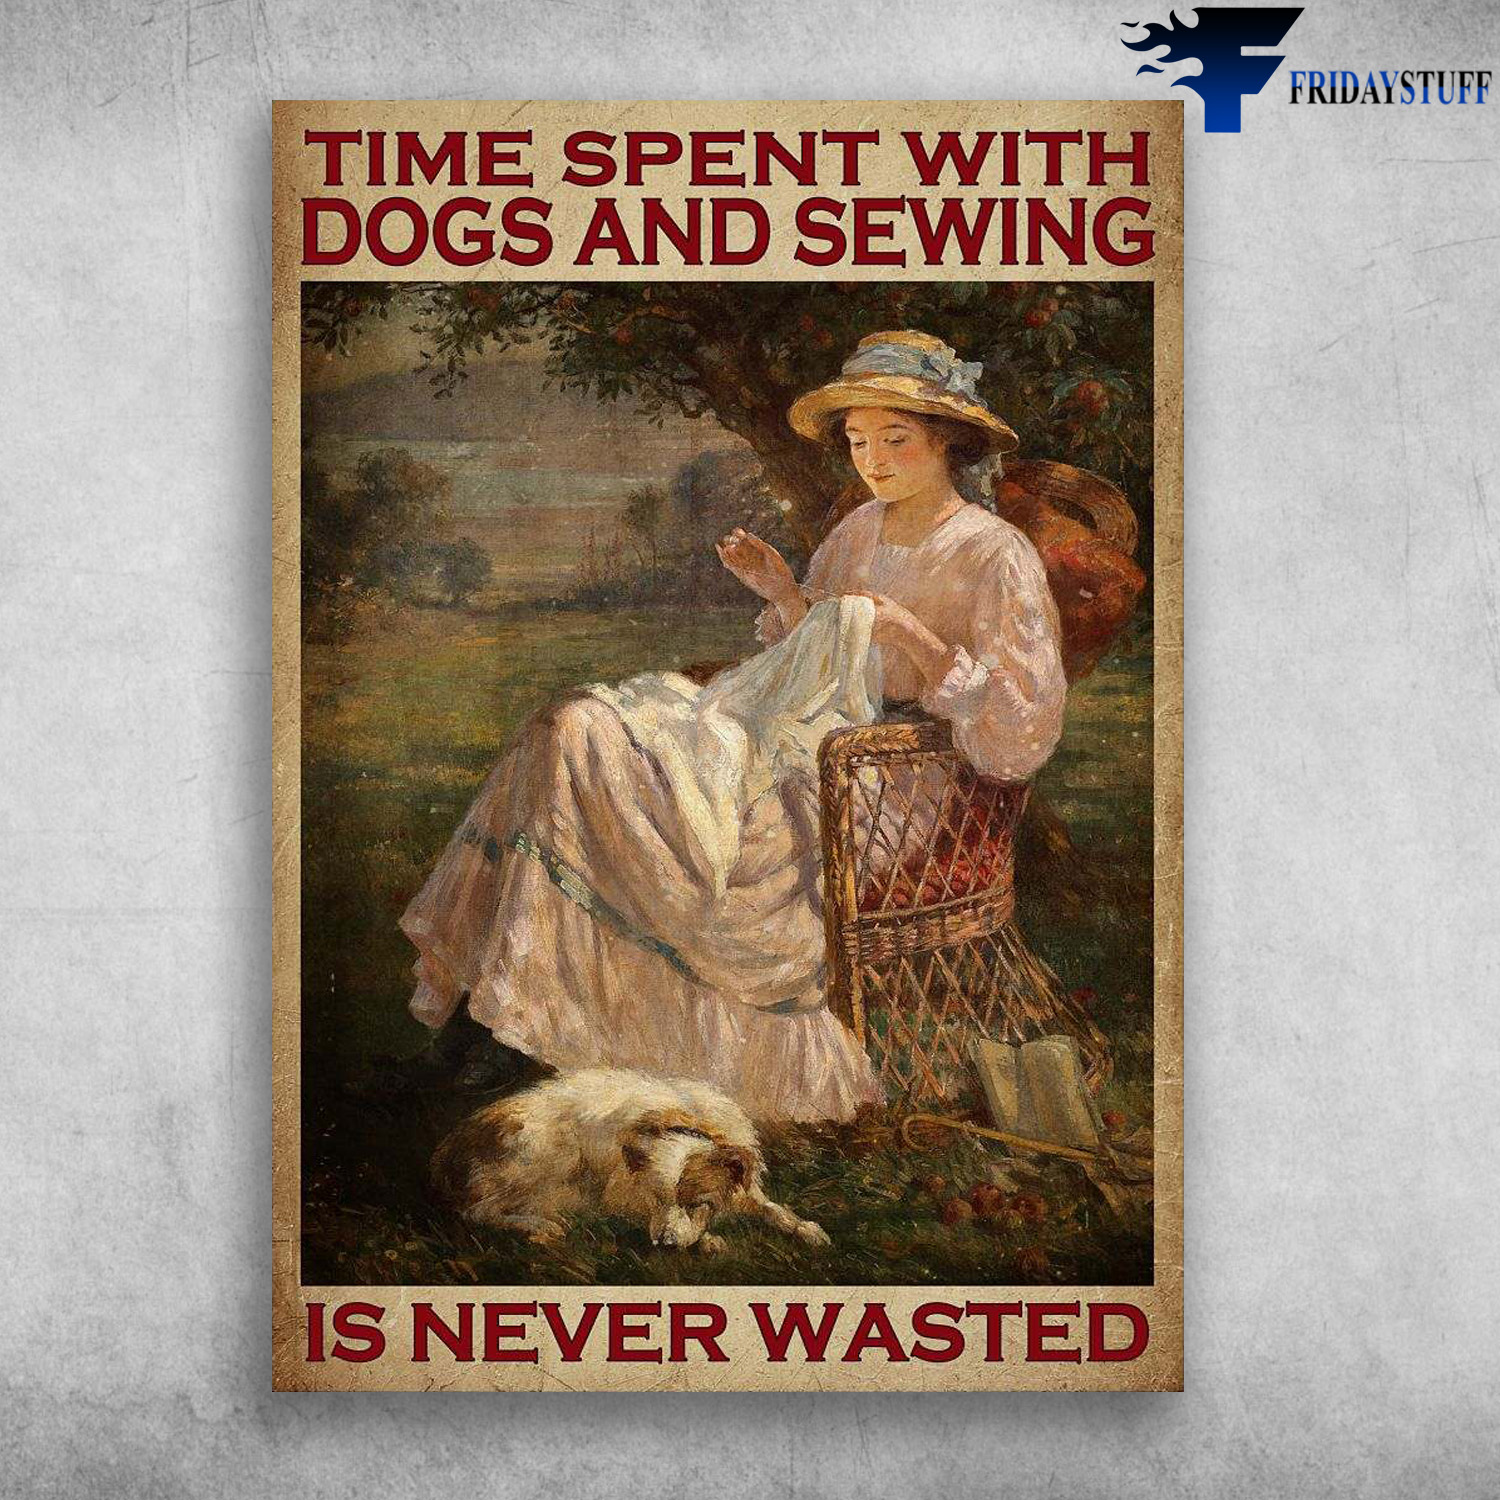 Girl Sewing, Dog And Sewing - Time Spent With Dogs And Sewing, Is Never Wasted